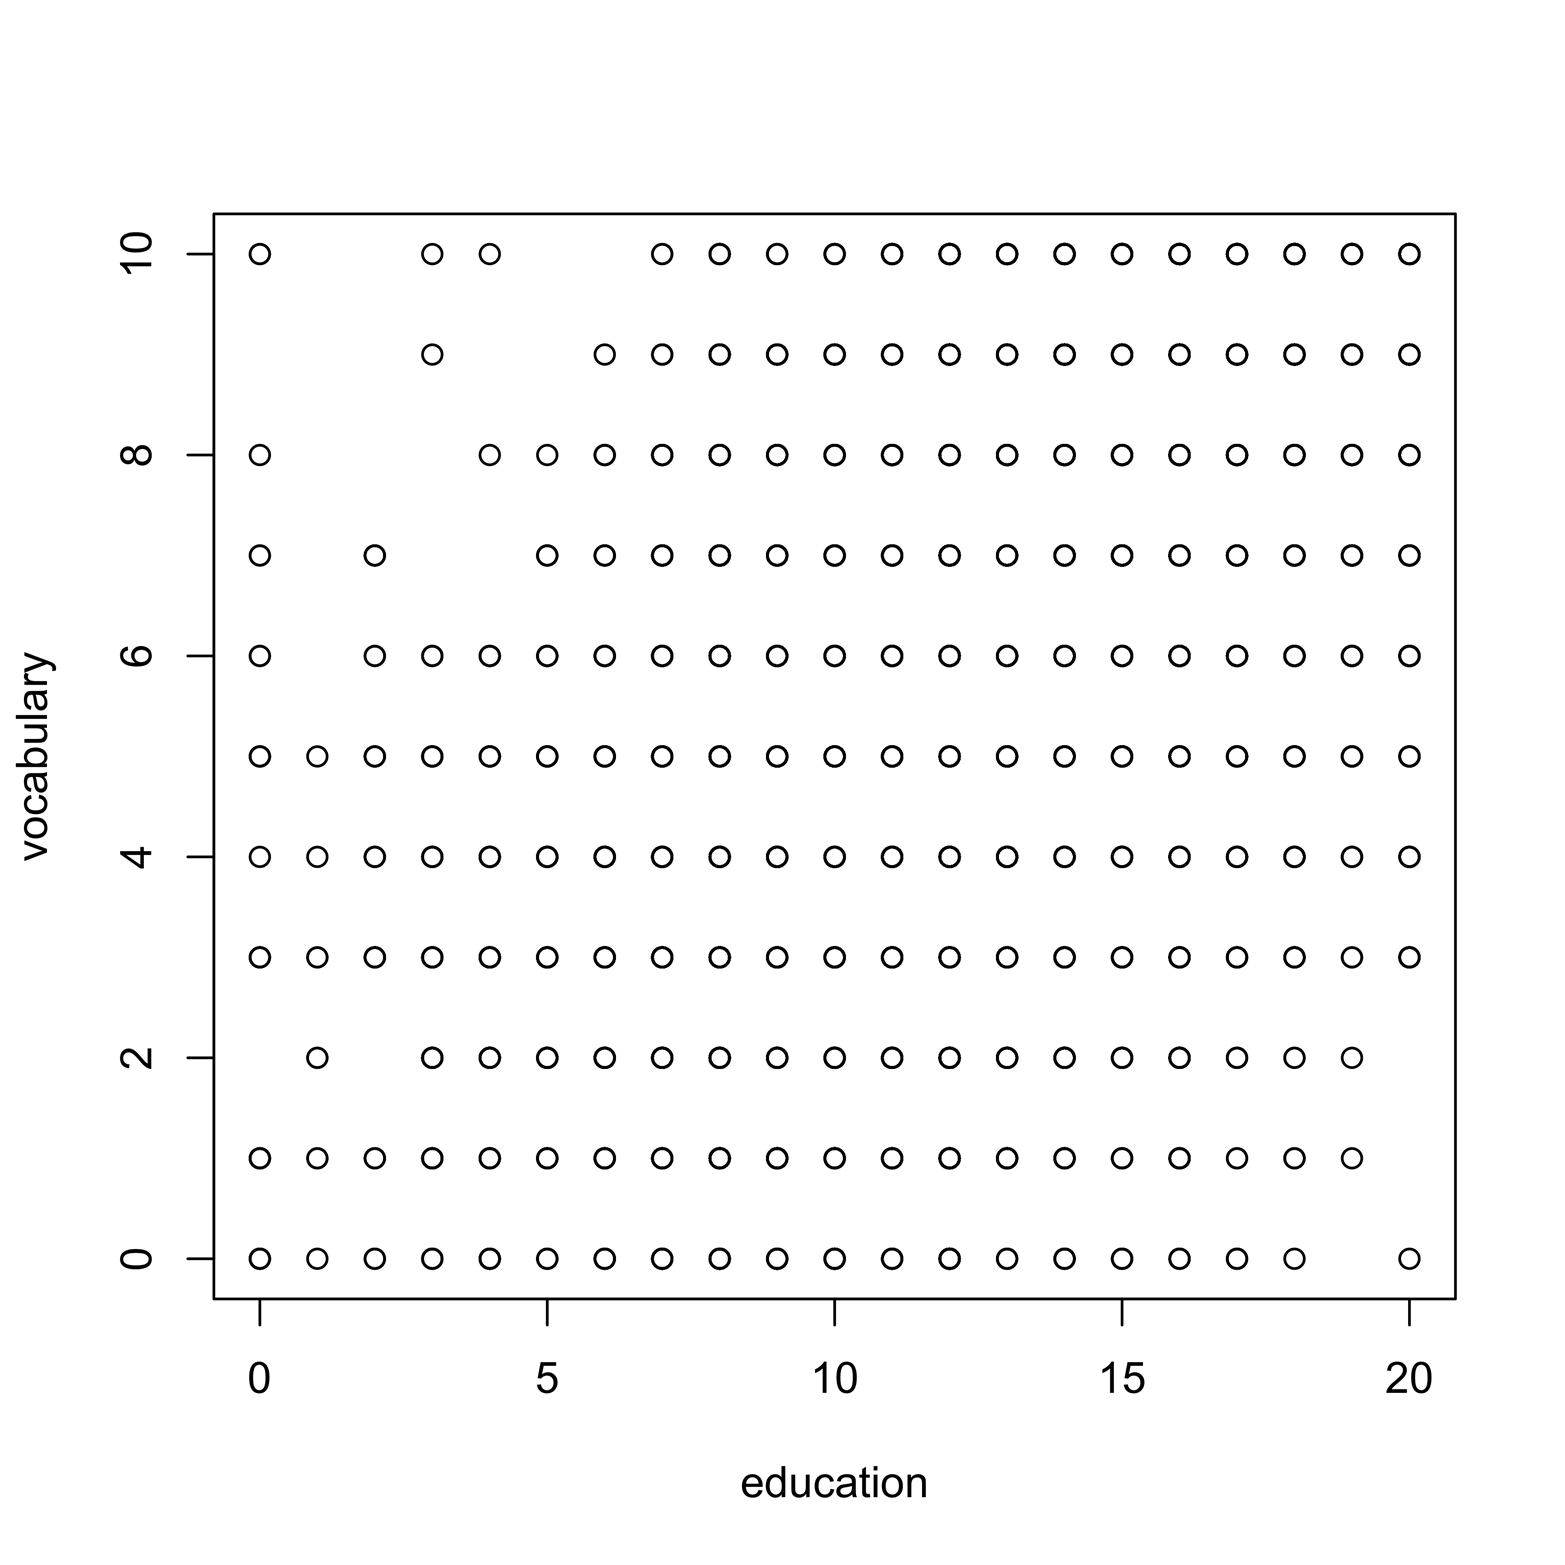 A scatter plot of education and vocabulary.